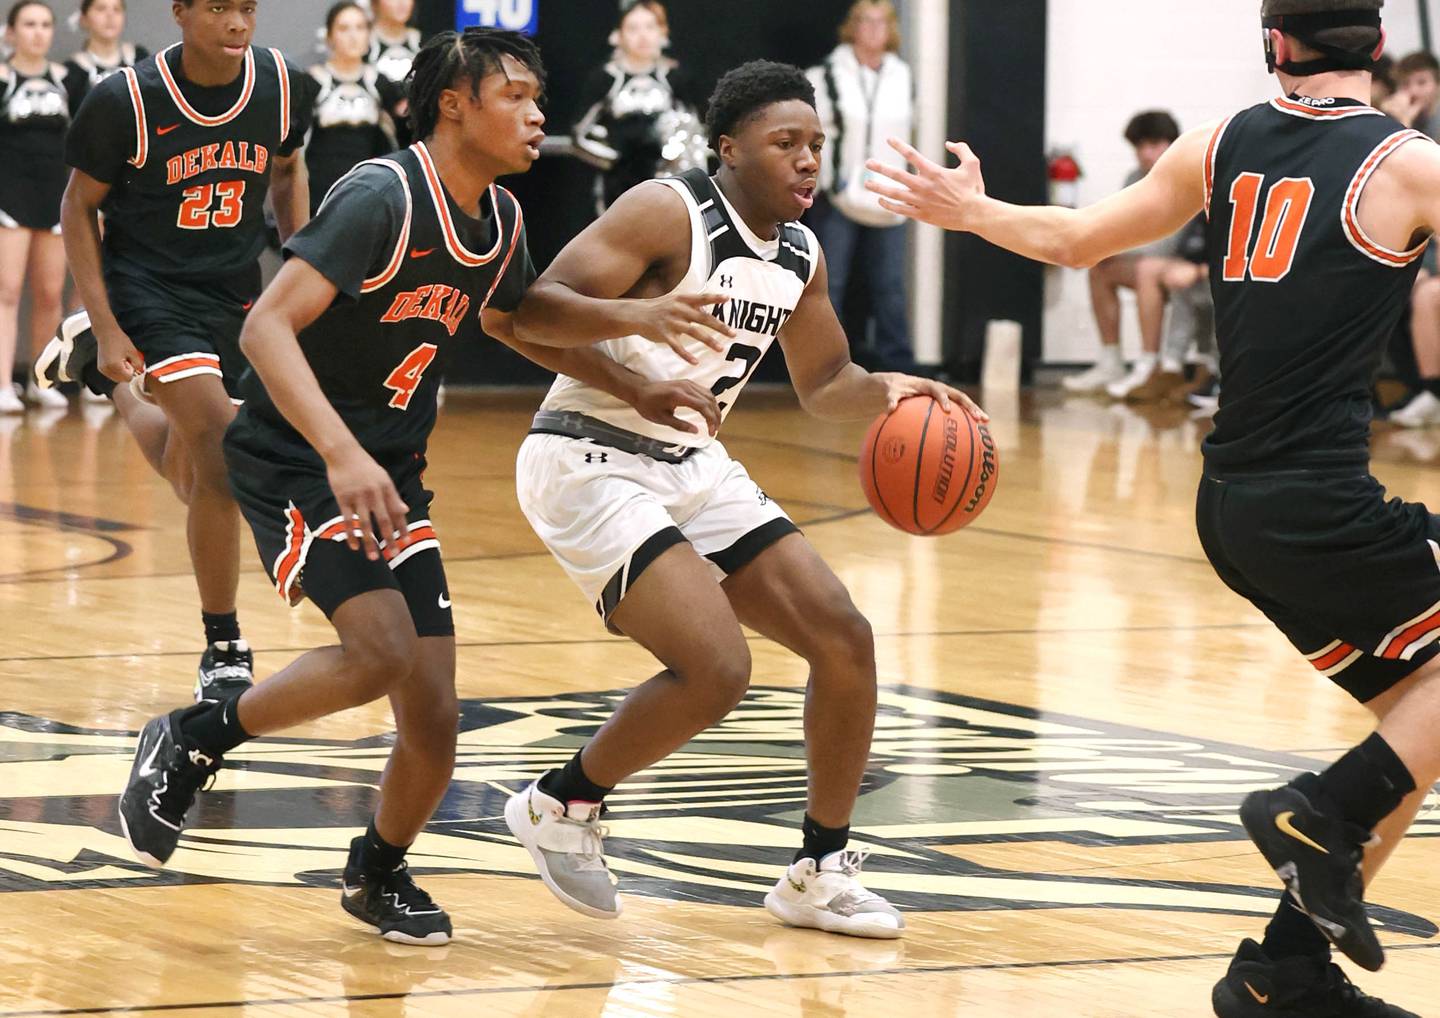 Kaneland's Gevon Grant dribbles the ball between DeKalb's Johnny Henderson and Eric Rosenow during their game Tuesday, Jan. 24, 2023, at Kaneland High School.